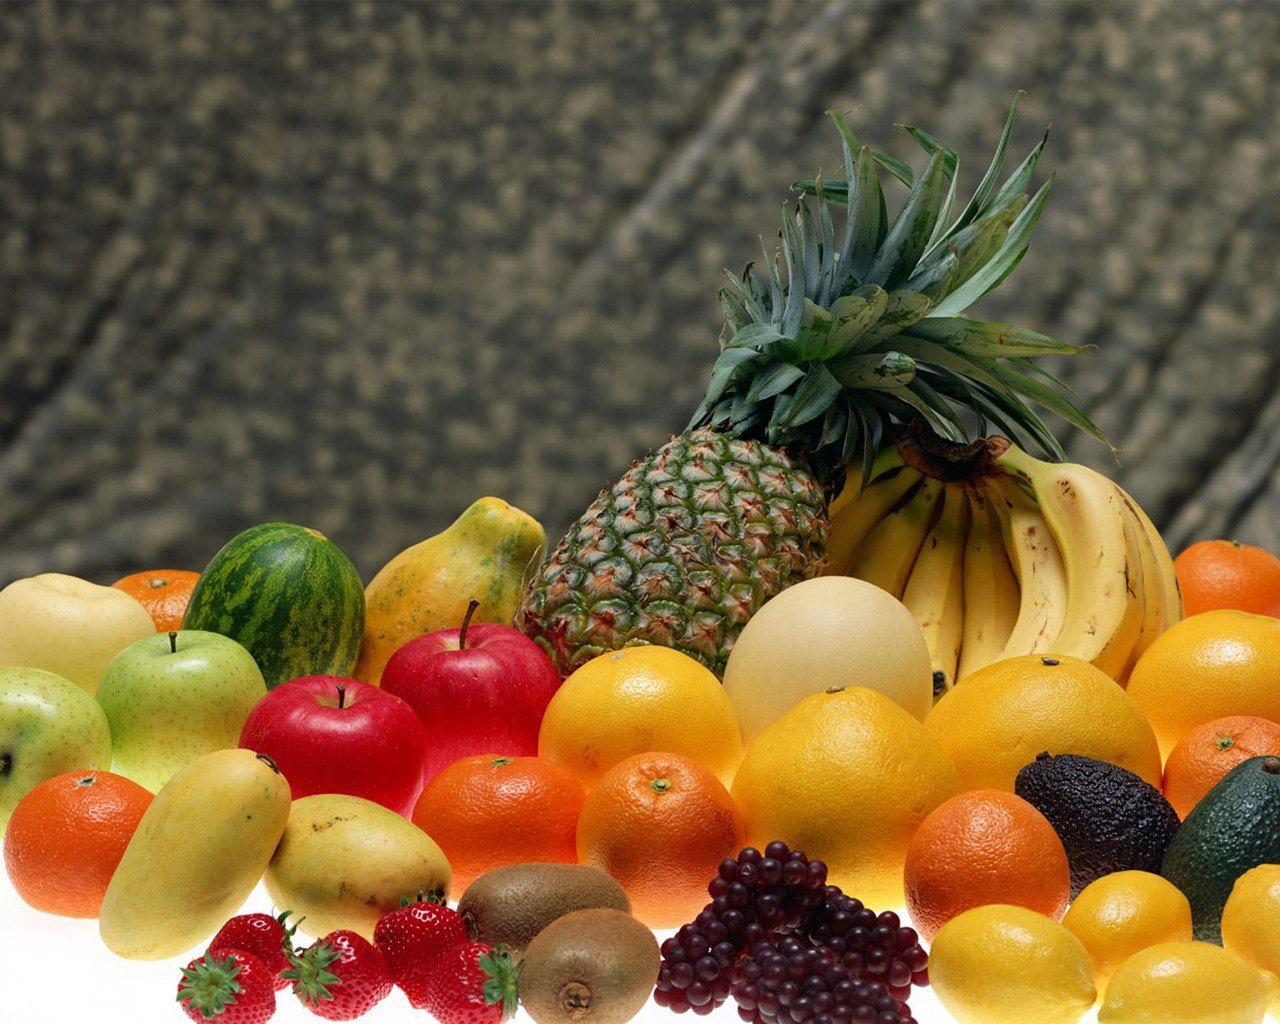 Fruits High Quality Wallpaper for PC & Mac, Tablet, Laptop, Mobile